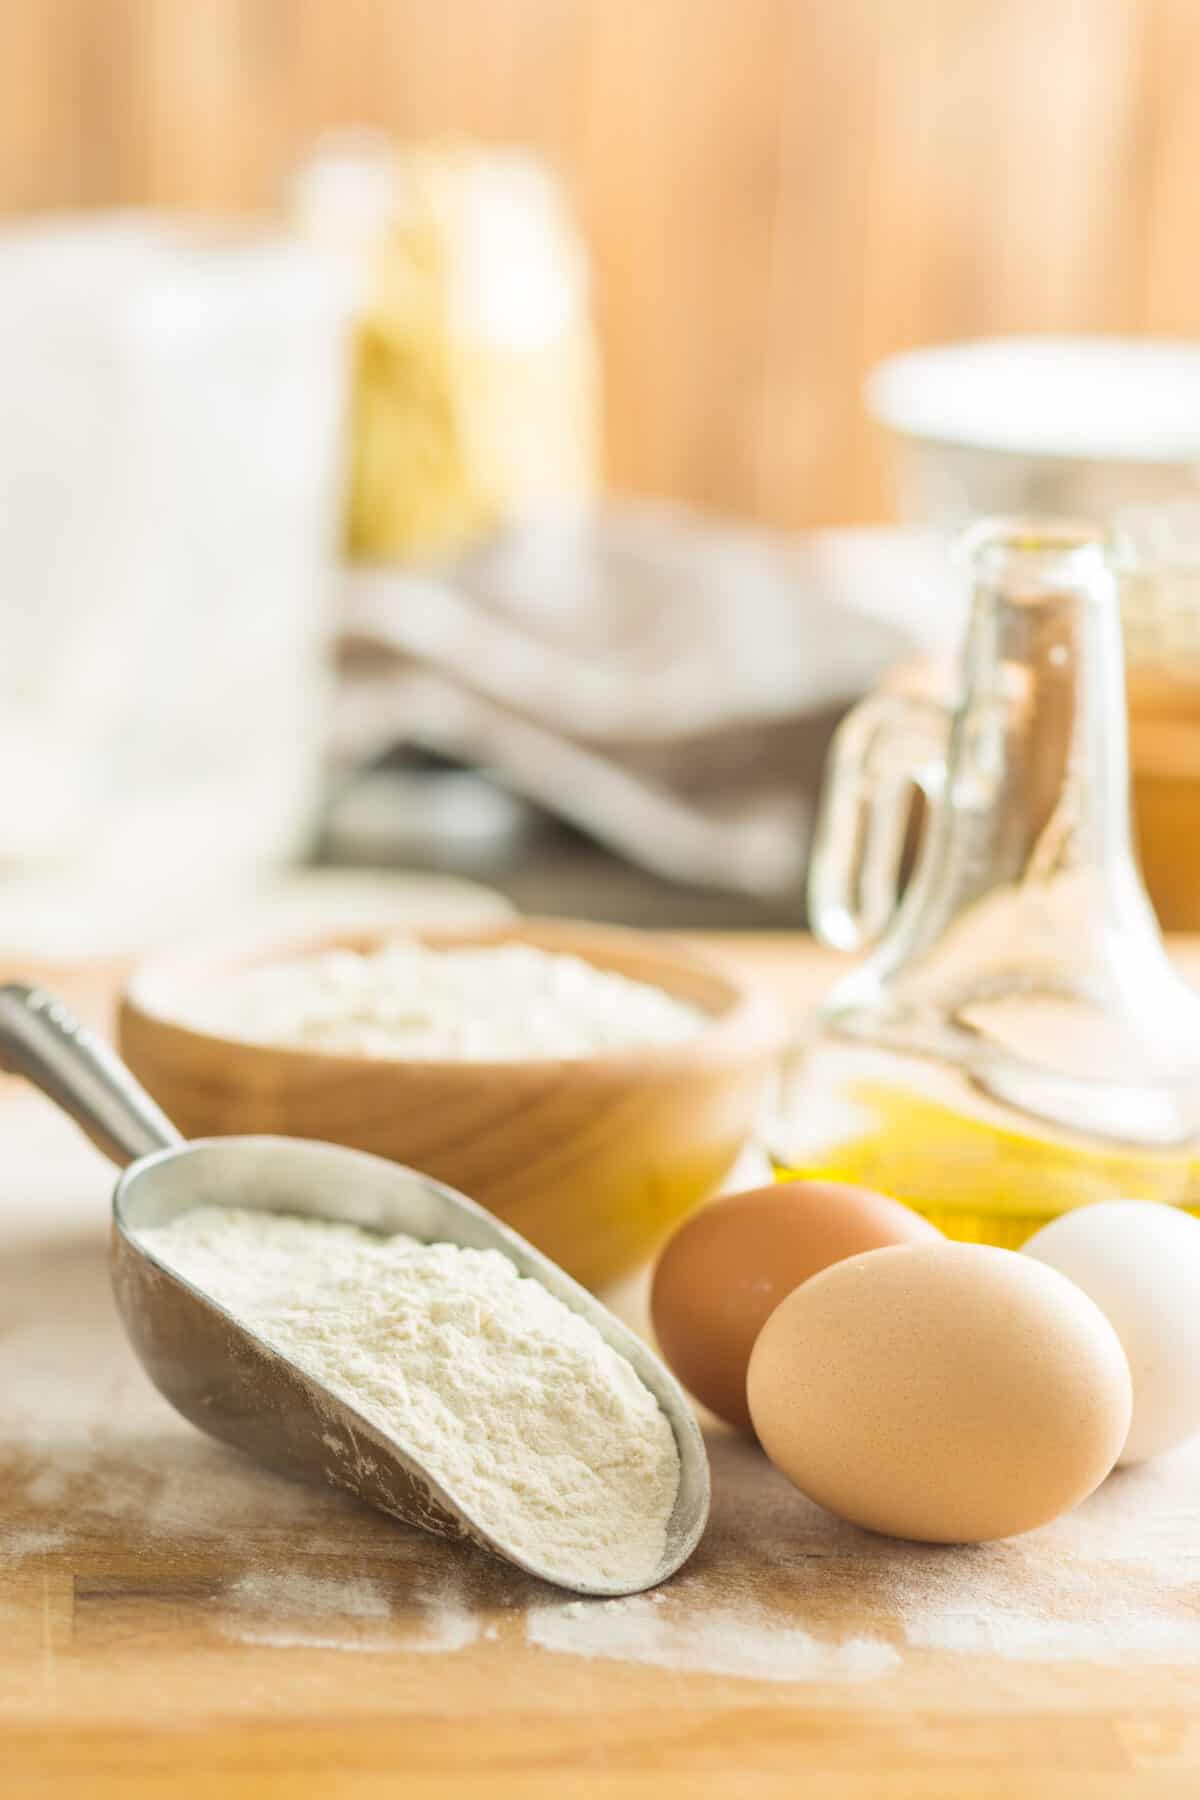 White flour and eggs on wooden table.